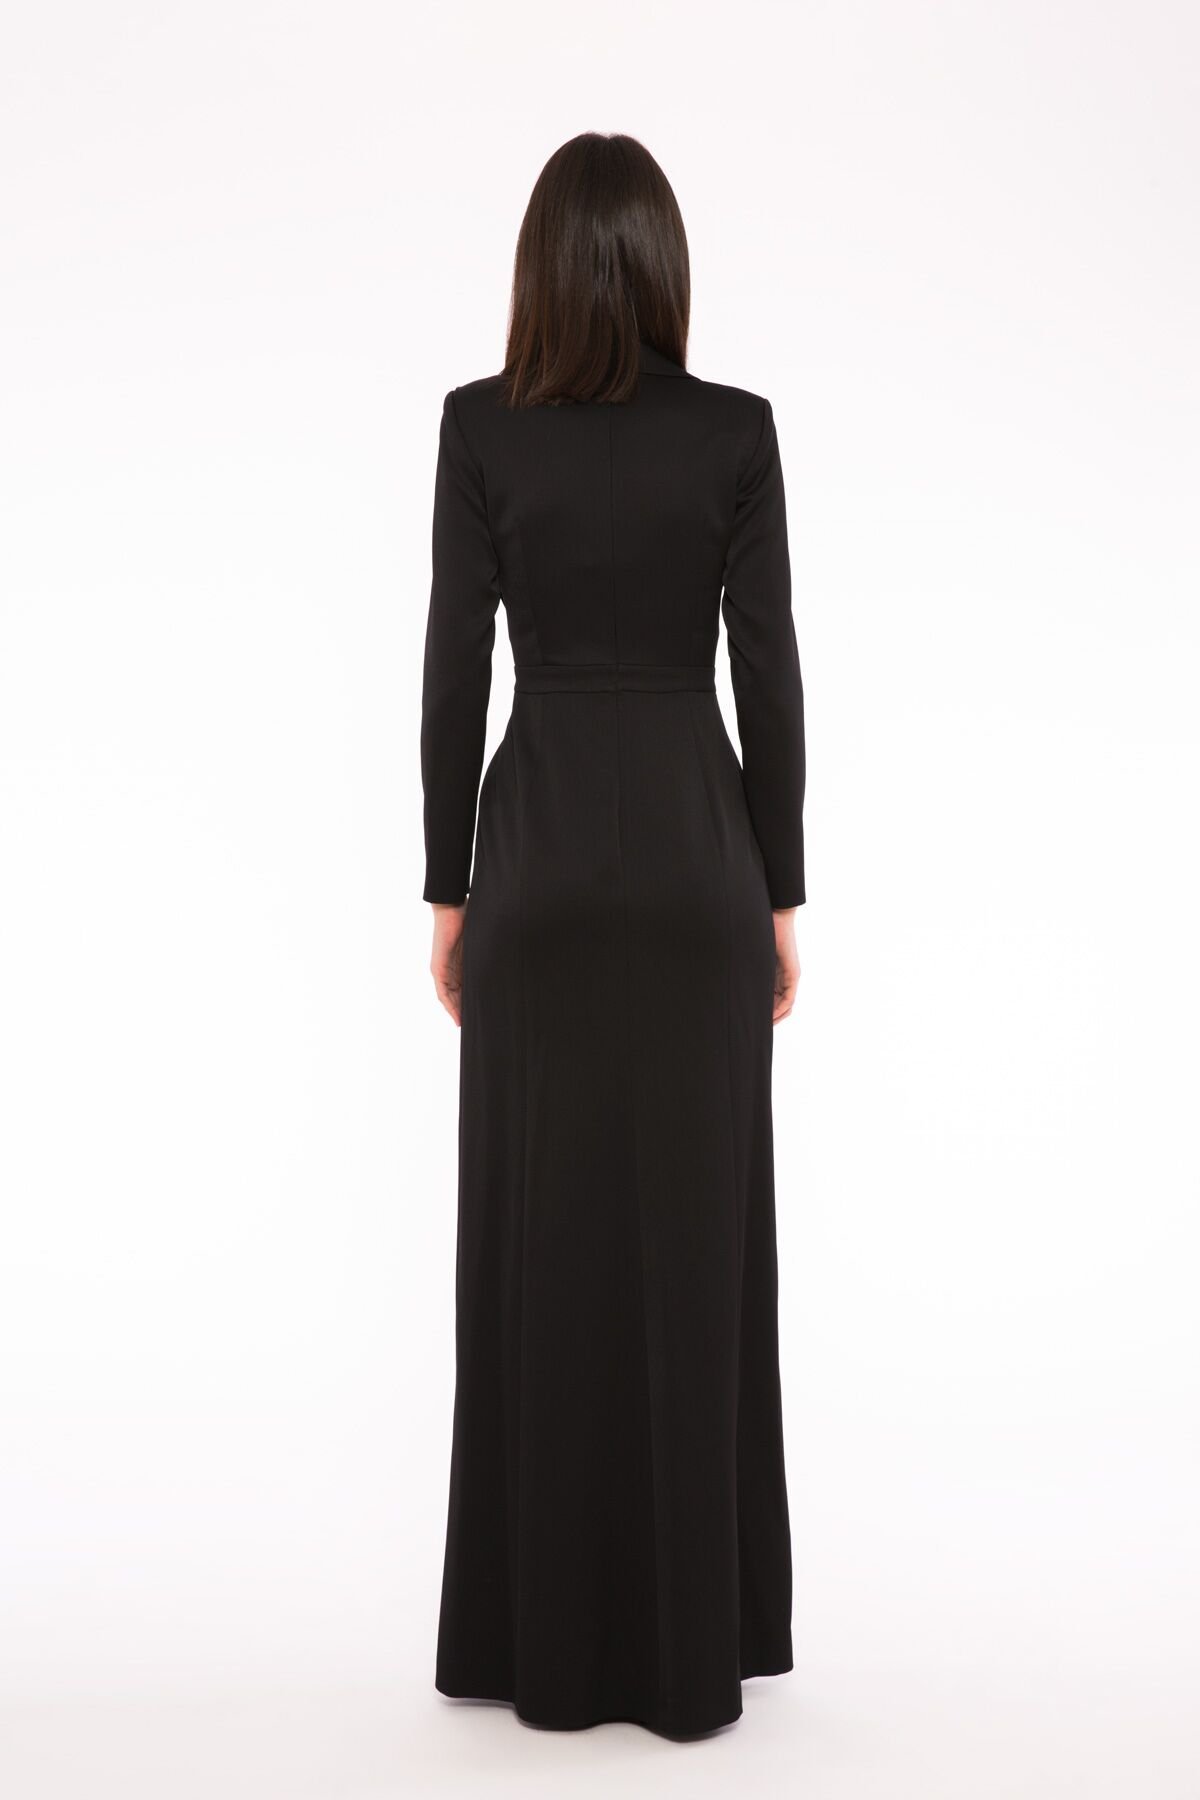 Long Black Evening Dress With Embroidery And Collar Detail